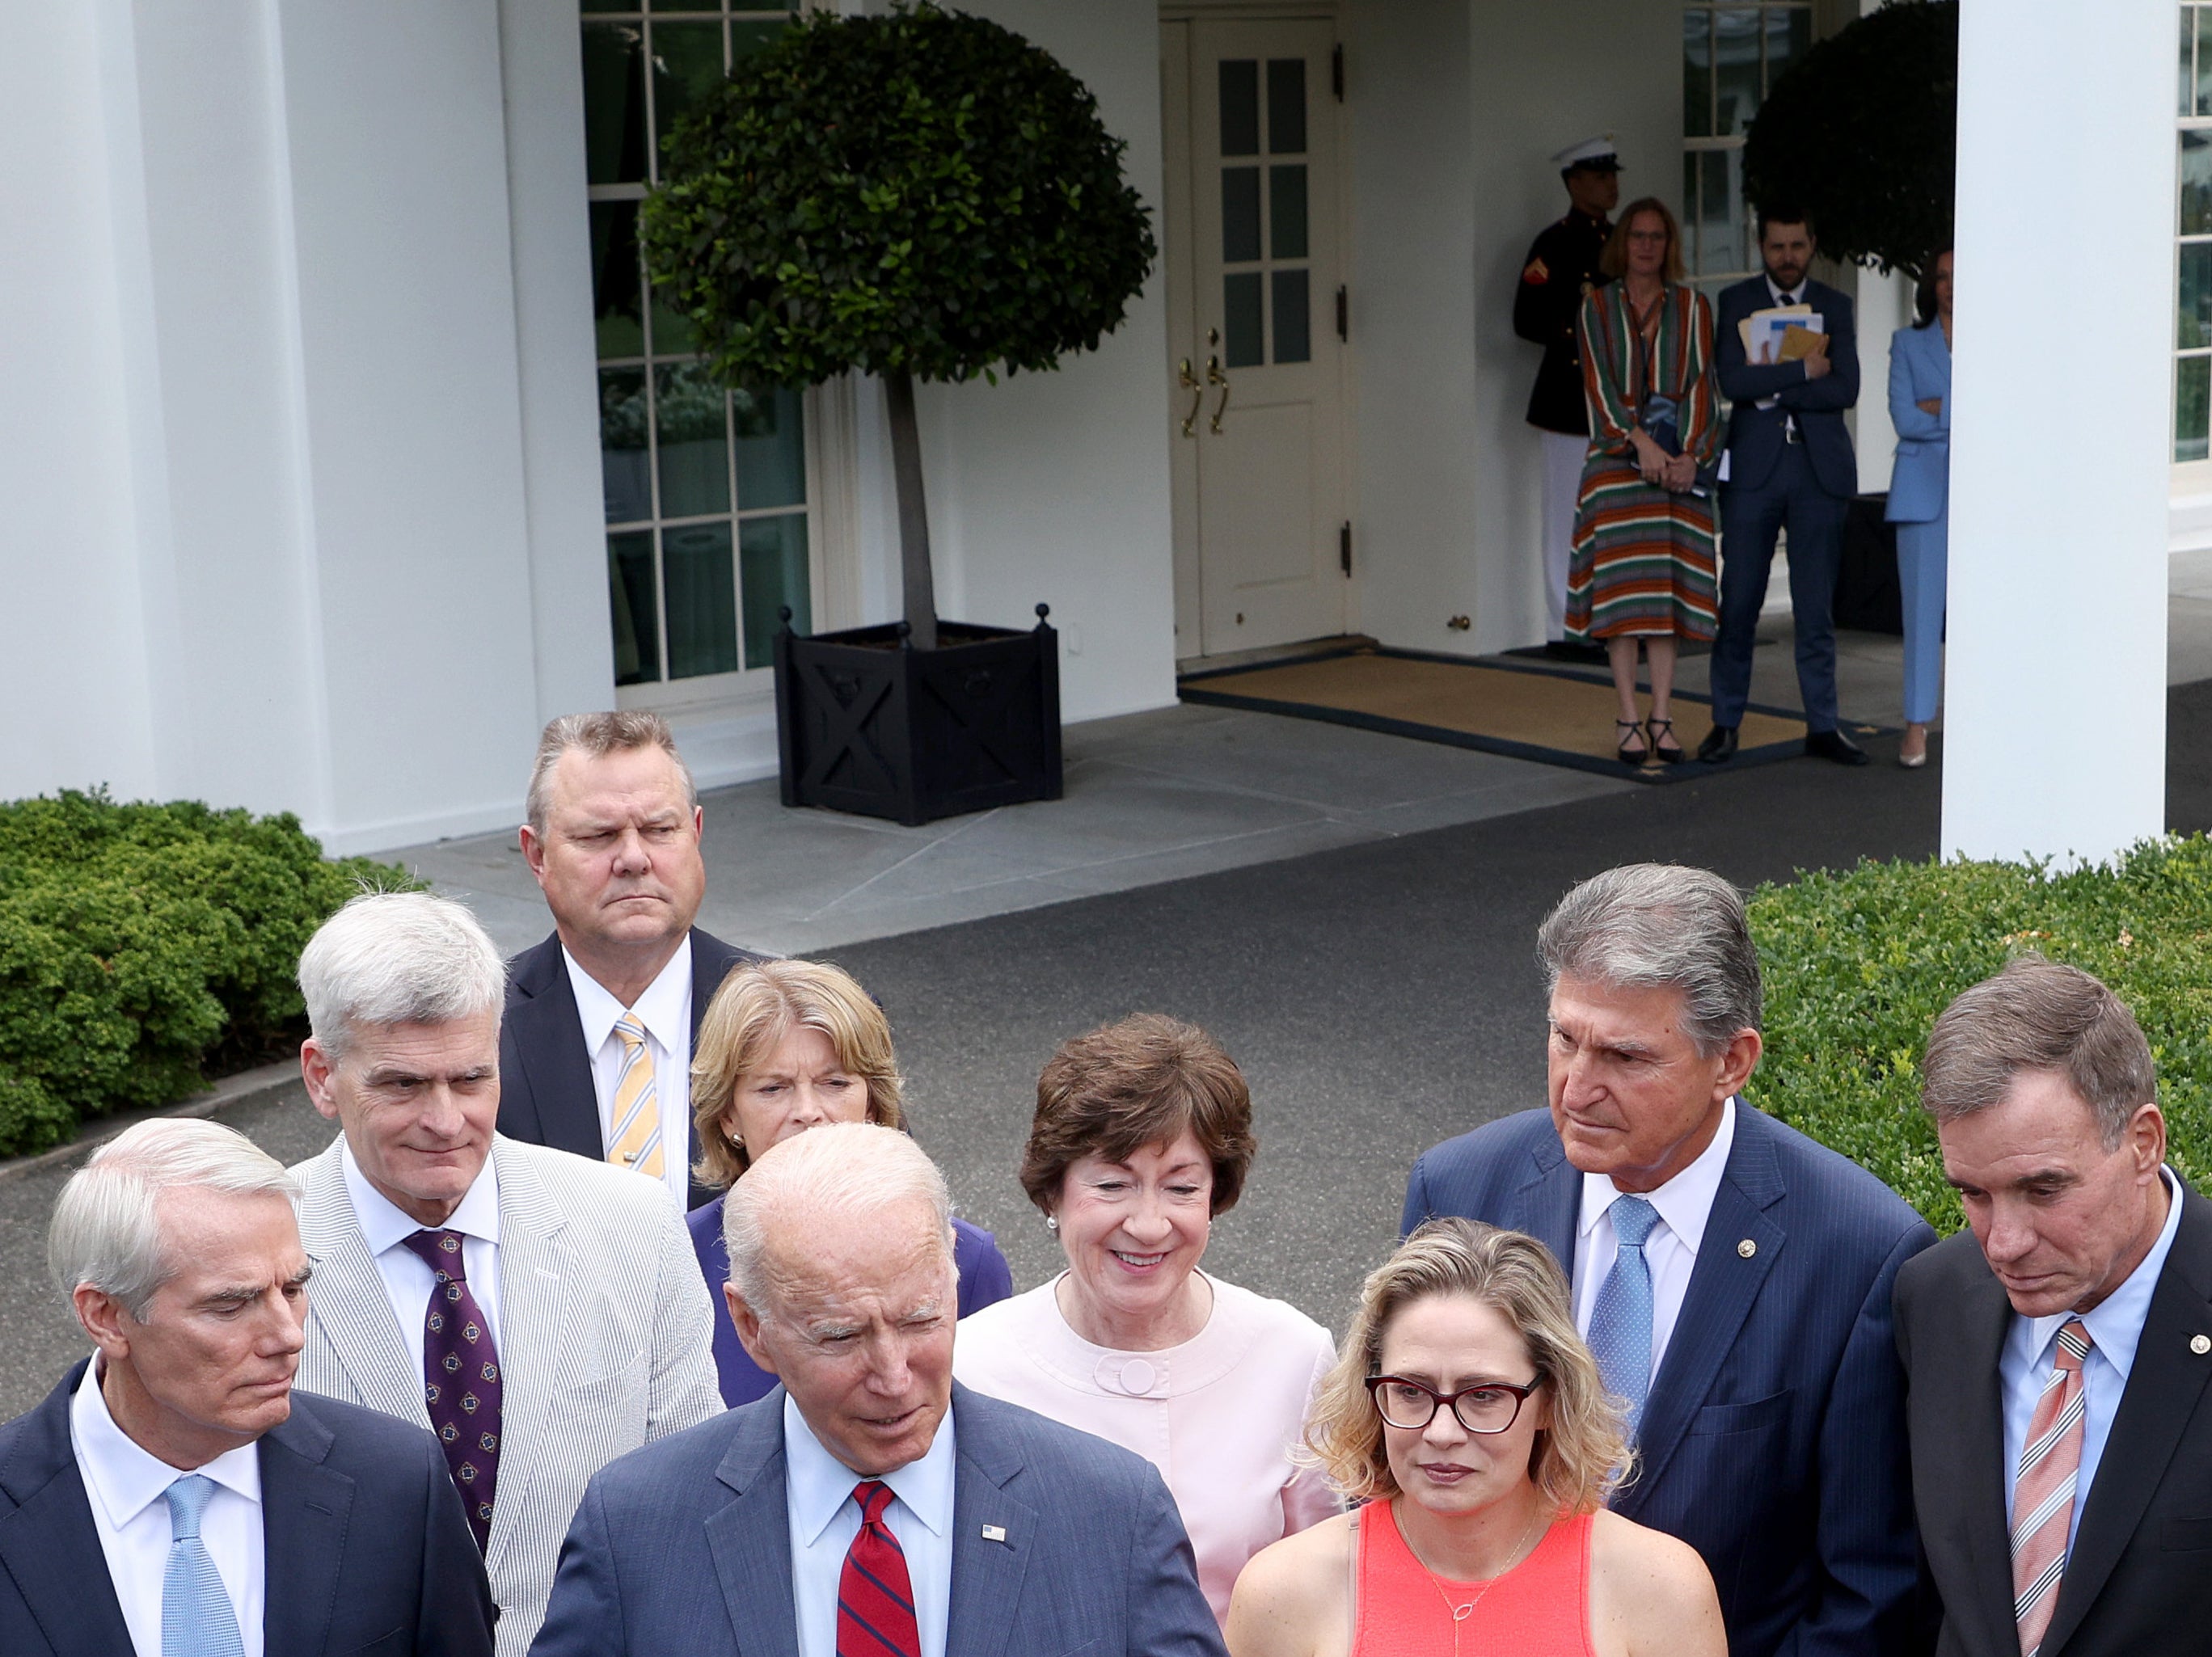 Kamala Harris watches on closely in the background as Joe Biden makes presidential announcements